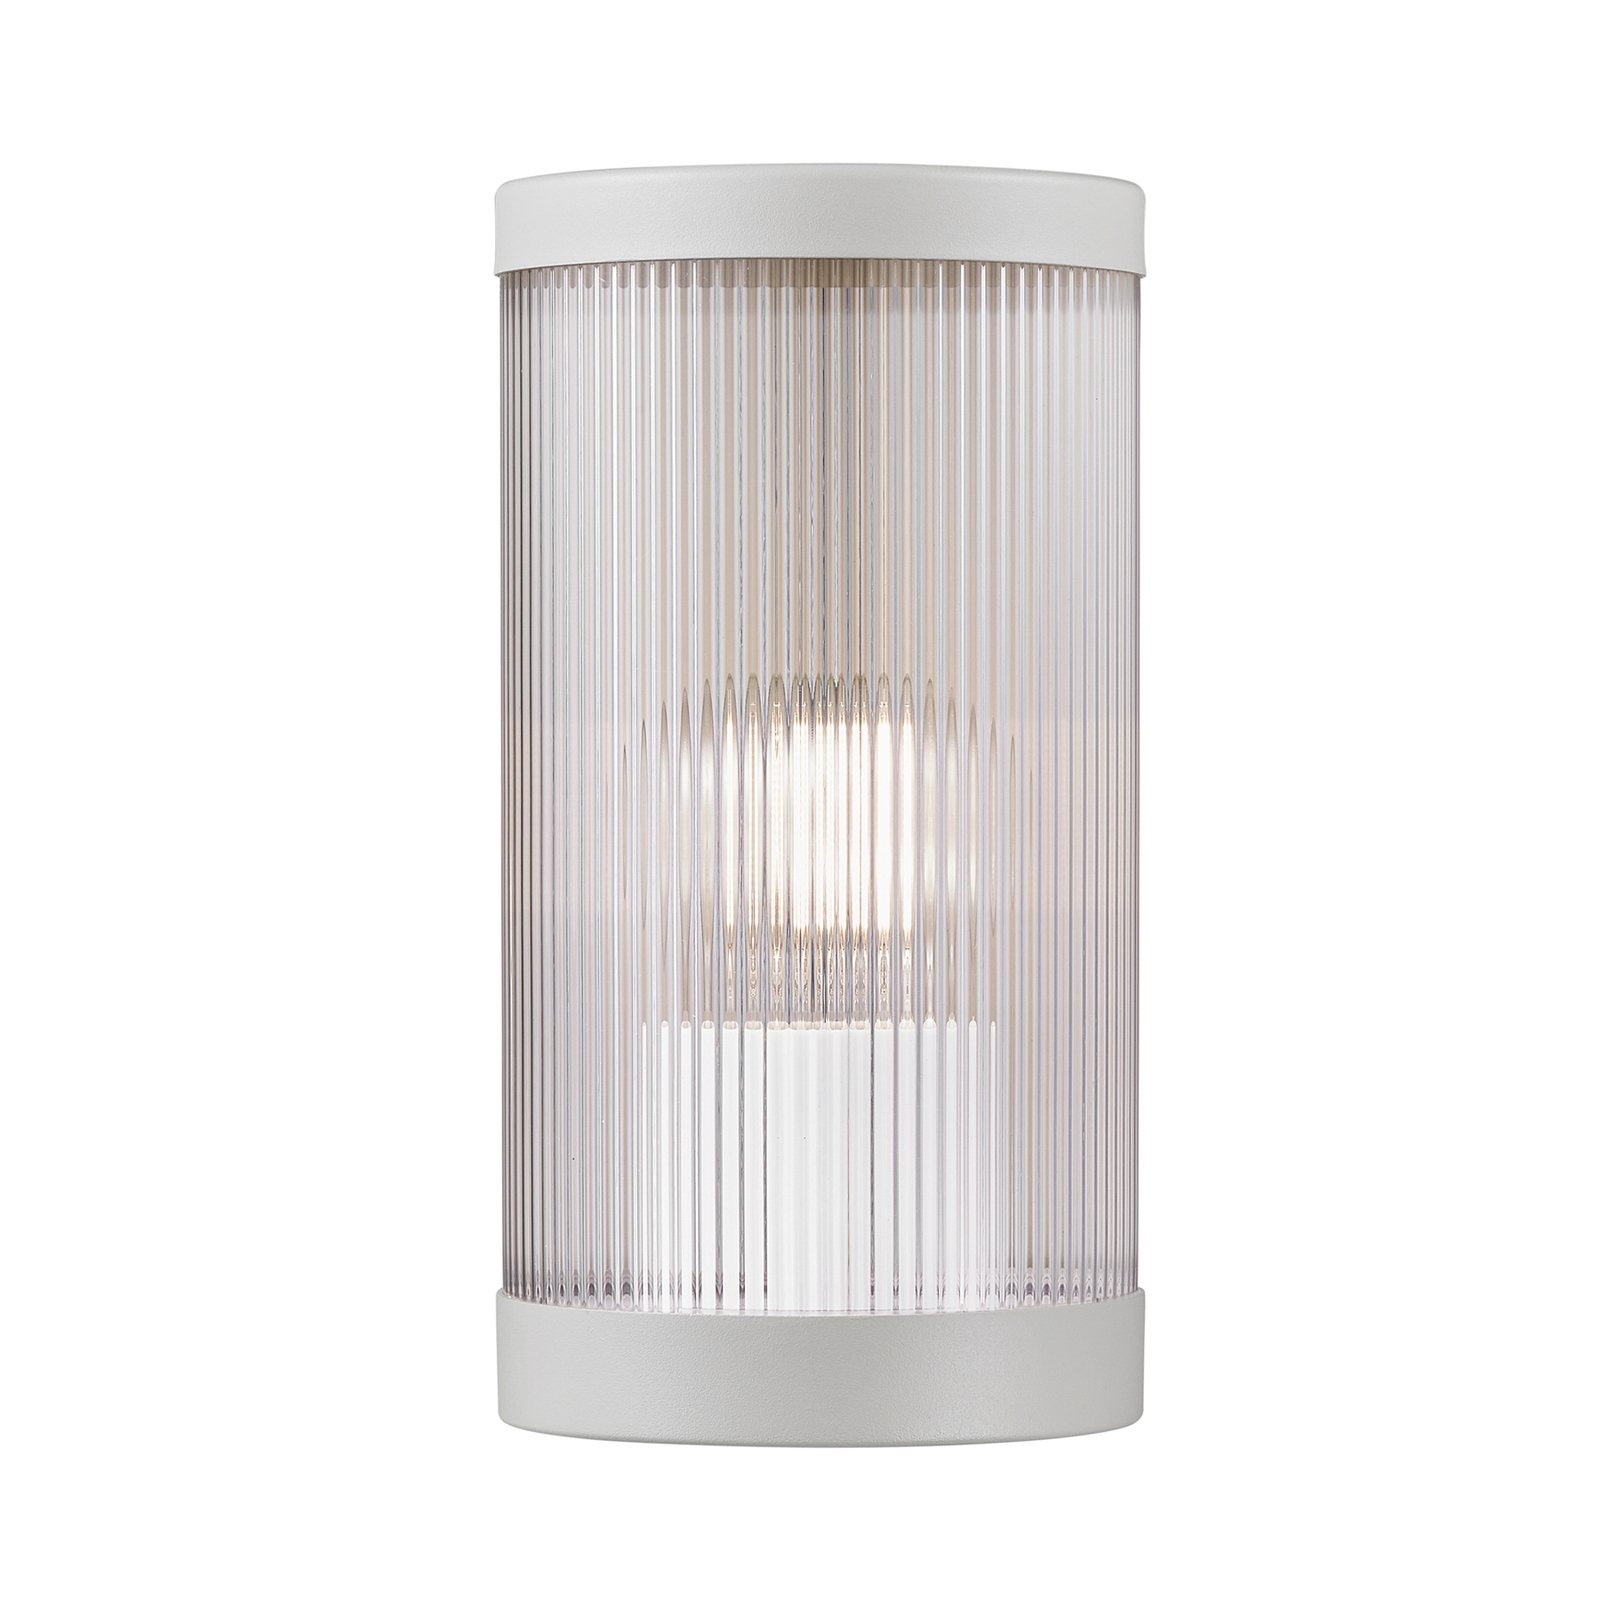 Coupar outdoor wall light, white